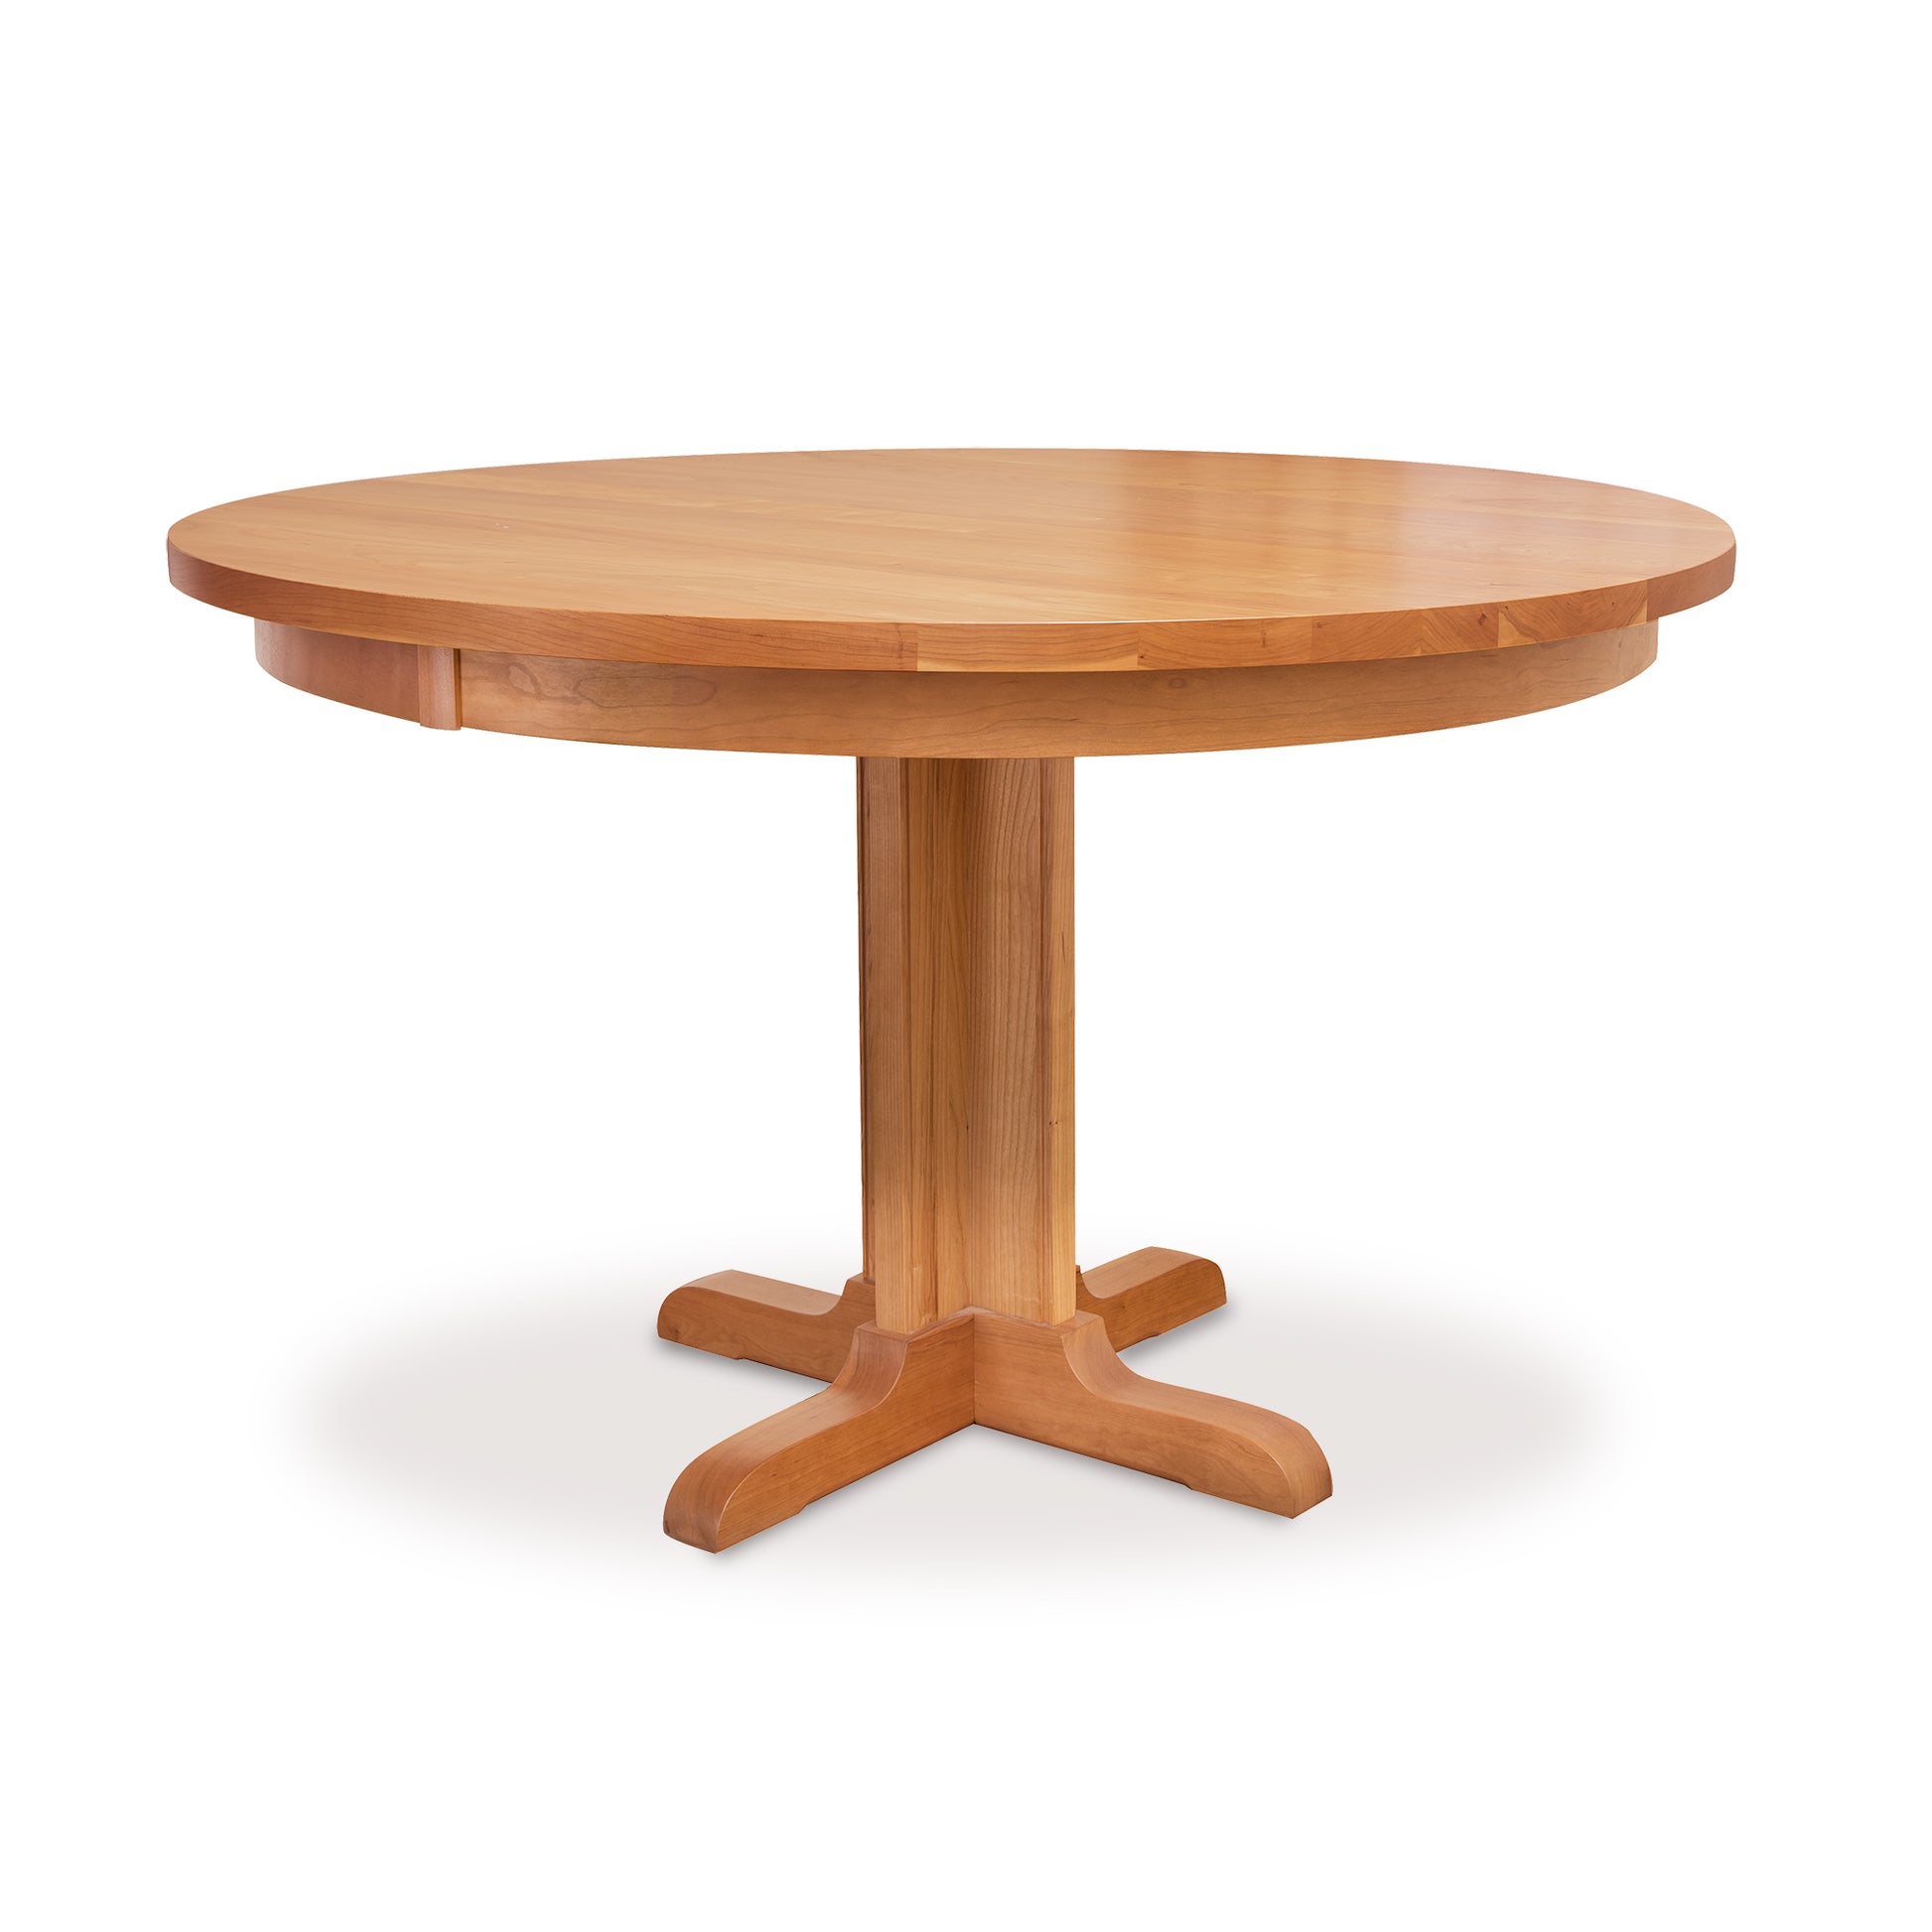 A sturdy Single - Leg Round Pedestal Table with a wooden base from Lyndon Furniture.